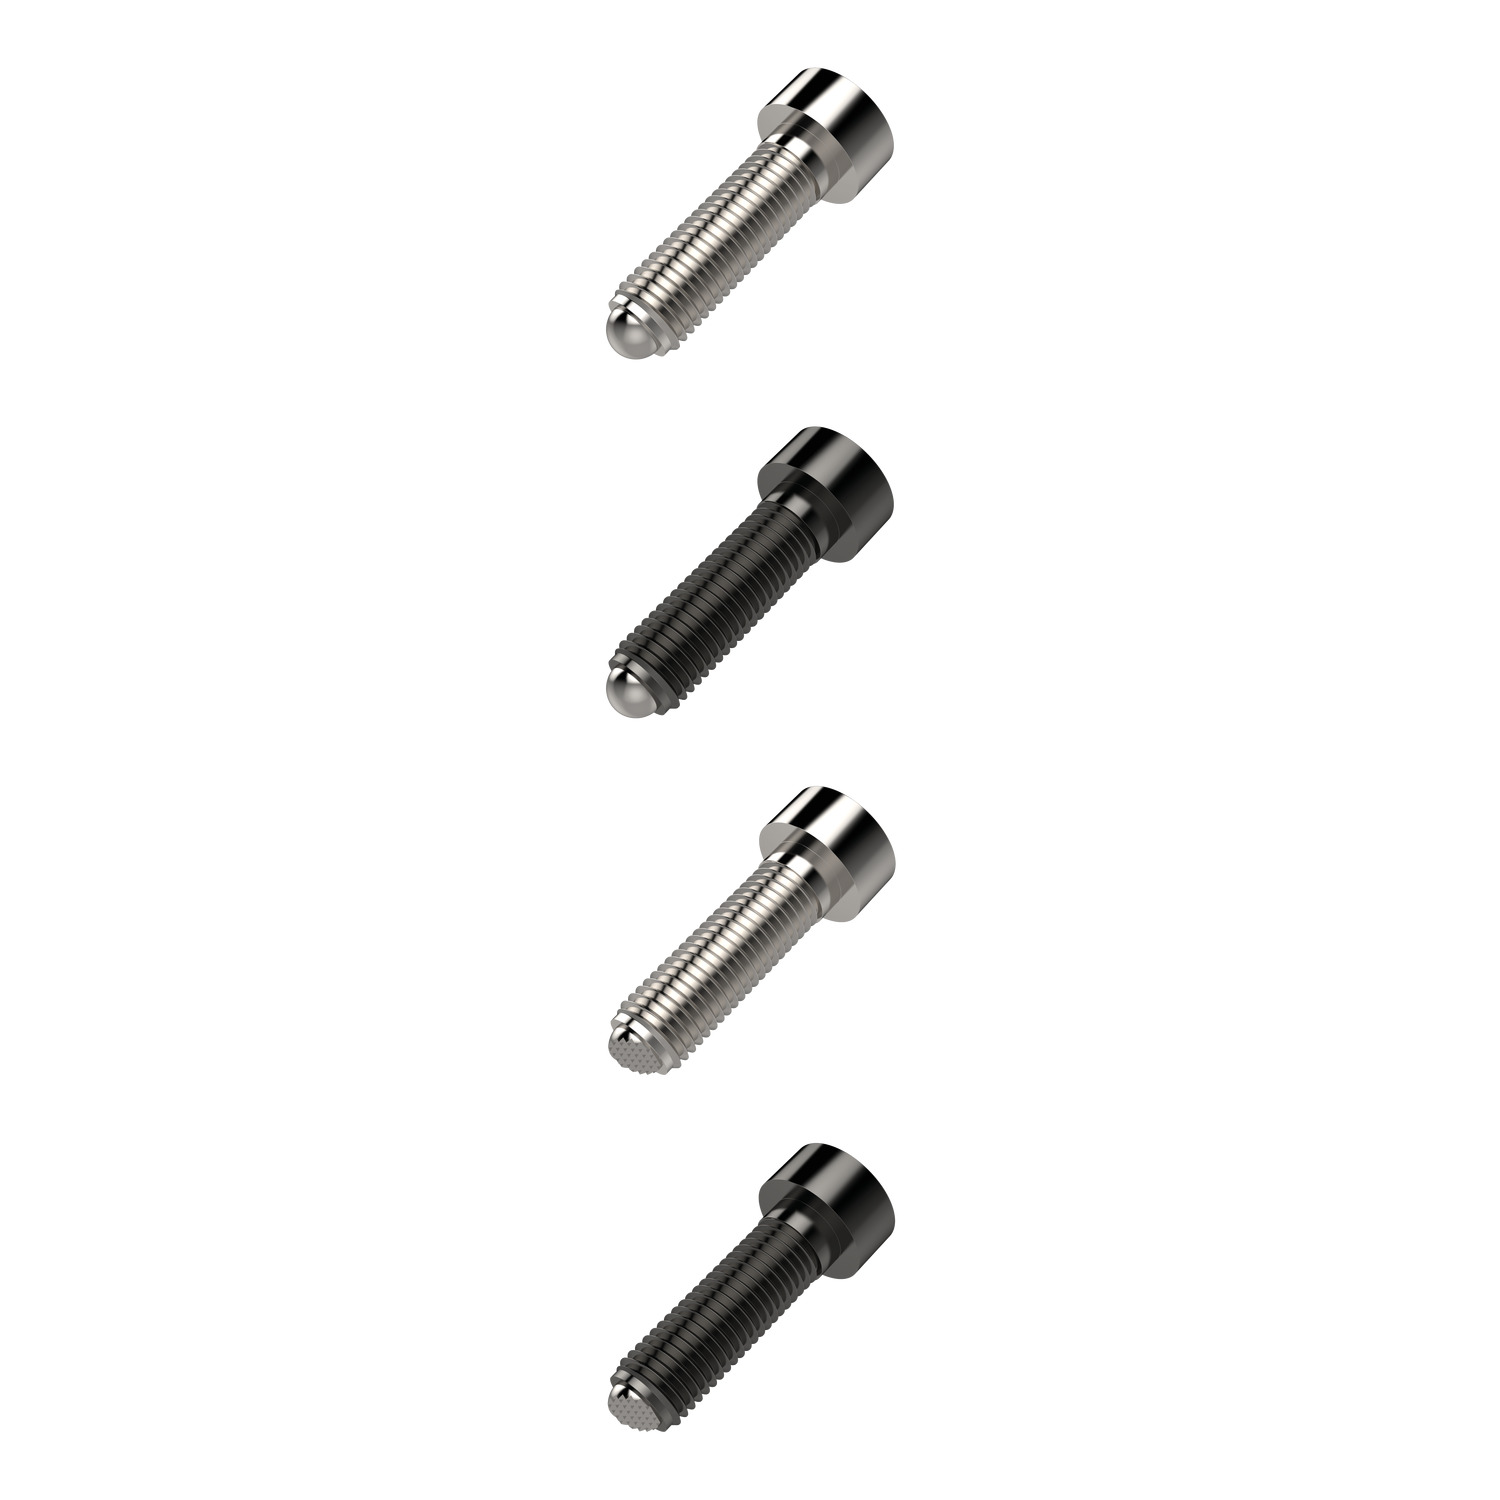 Thrust Screws - Headed A headed thrust screws range including round ball, flat ball, ribbed ball and two main material types. All variations come with a hex socket in the head of the component.